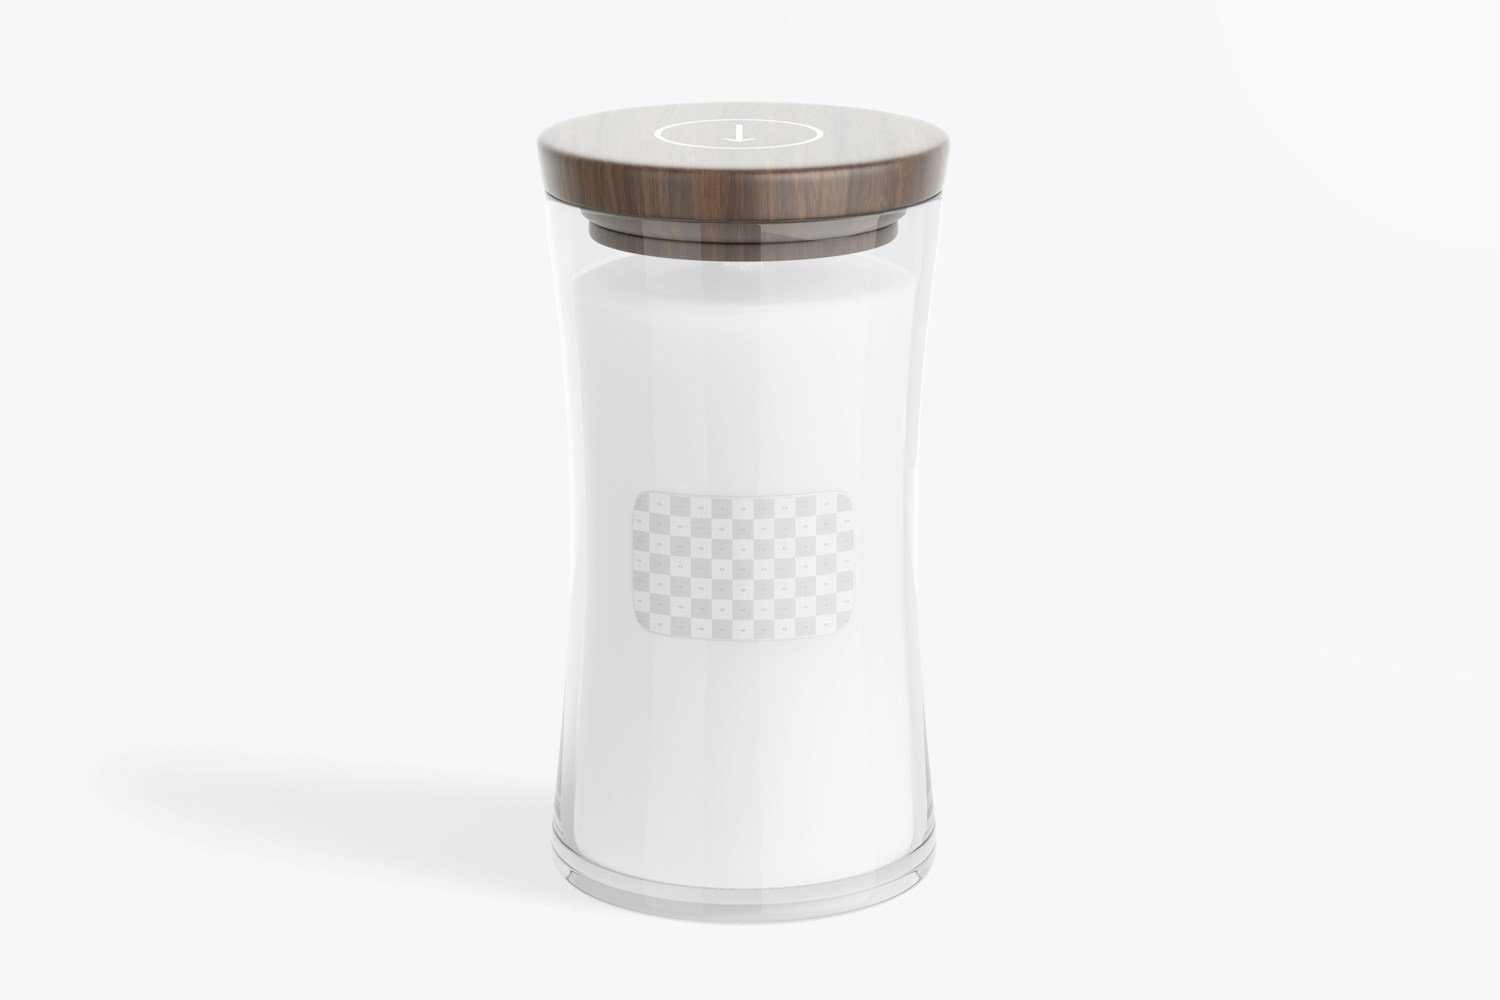 Glass Candle Jar with Lid Mockup, Front View